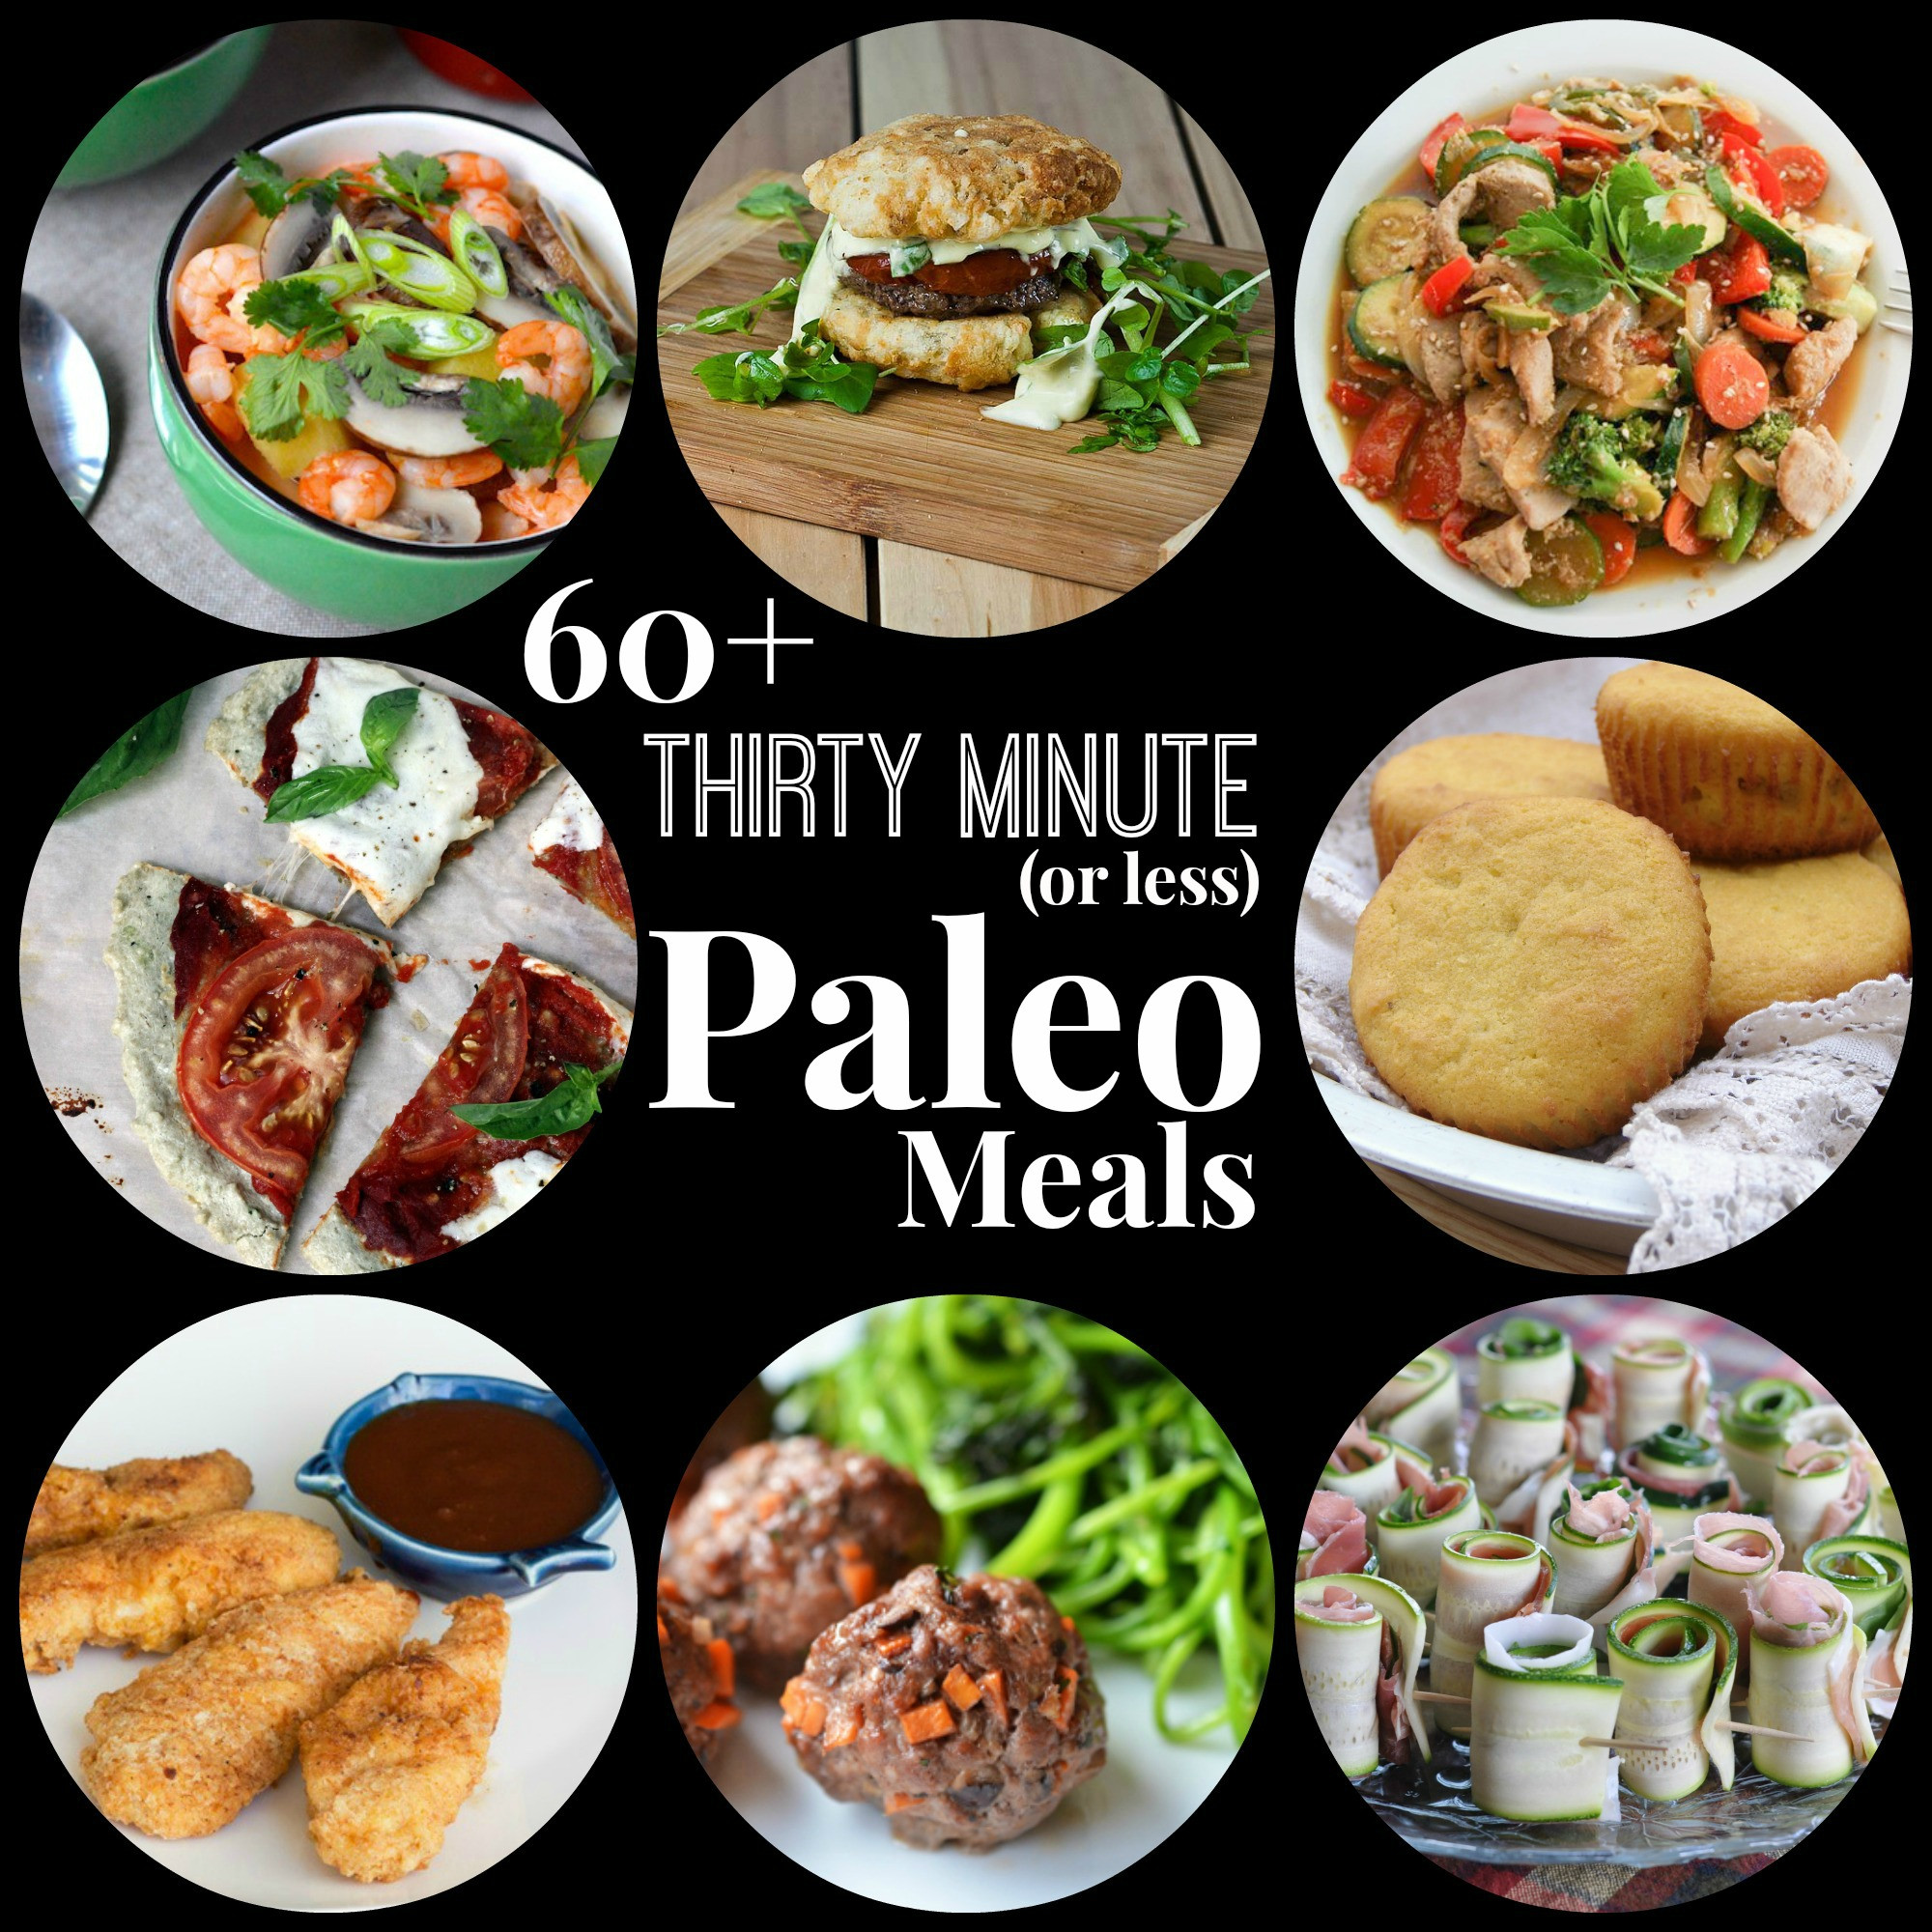 Healthy Paleo Dinners
 60 Thirty Minute or less Paleo Meals